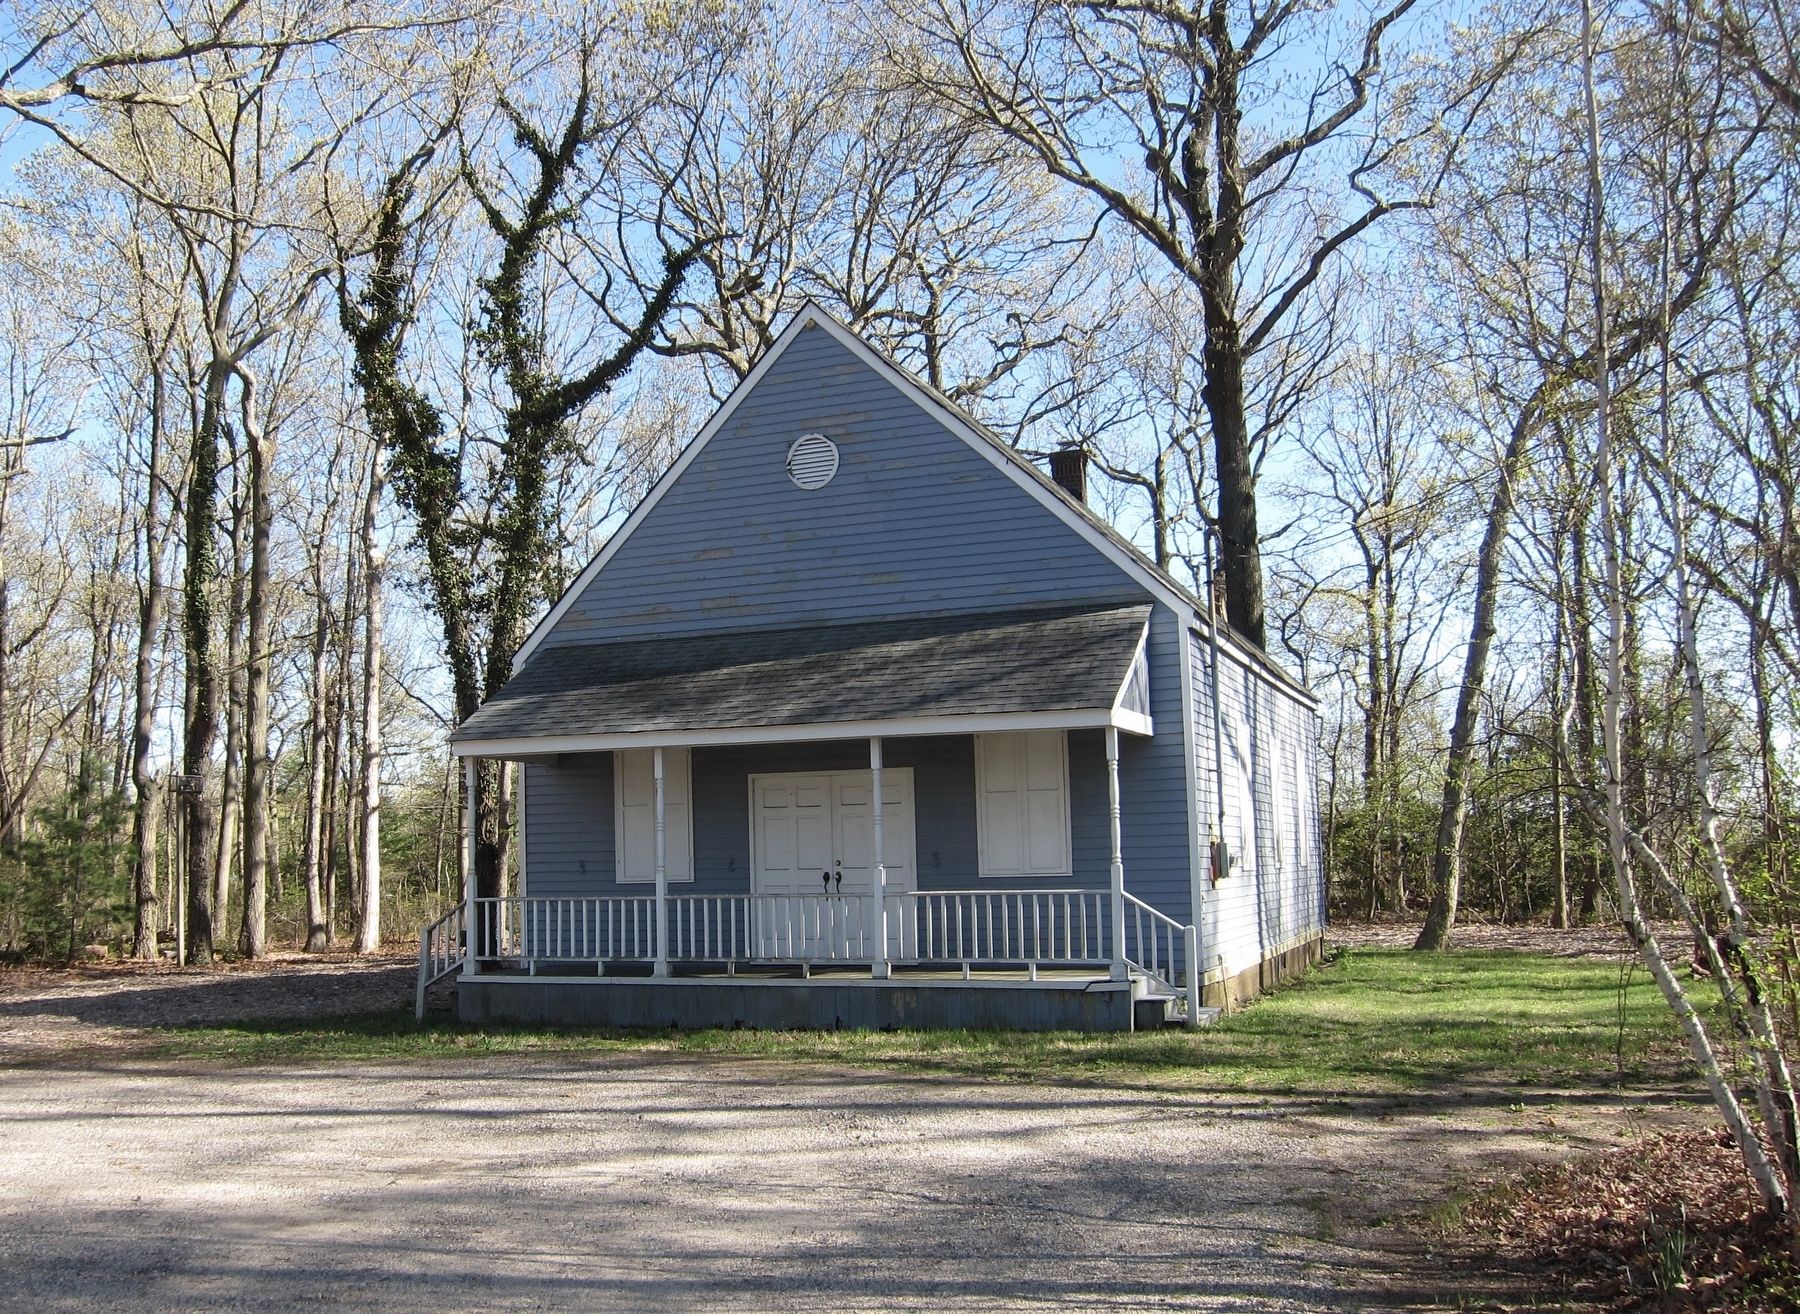 Quaker Meeting House image. Click for full size.